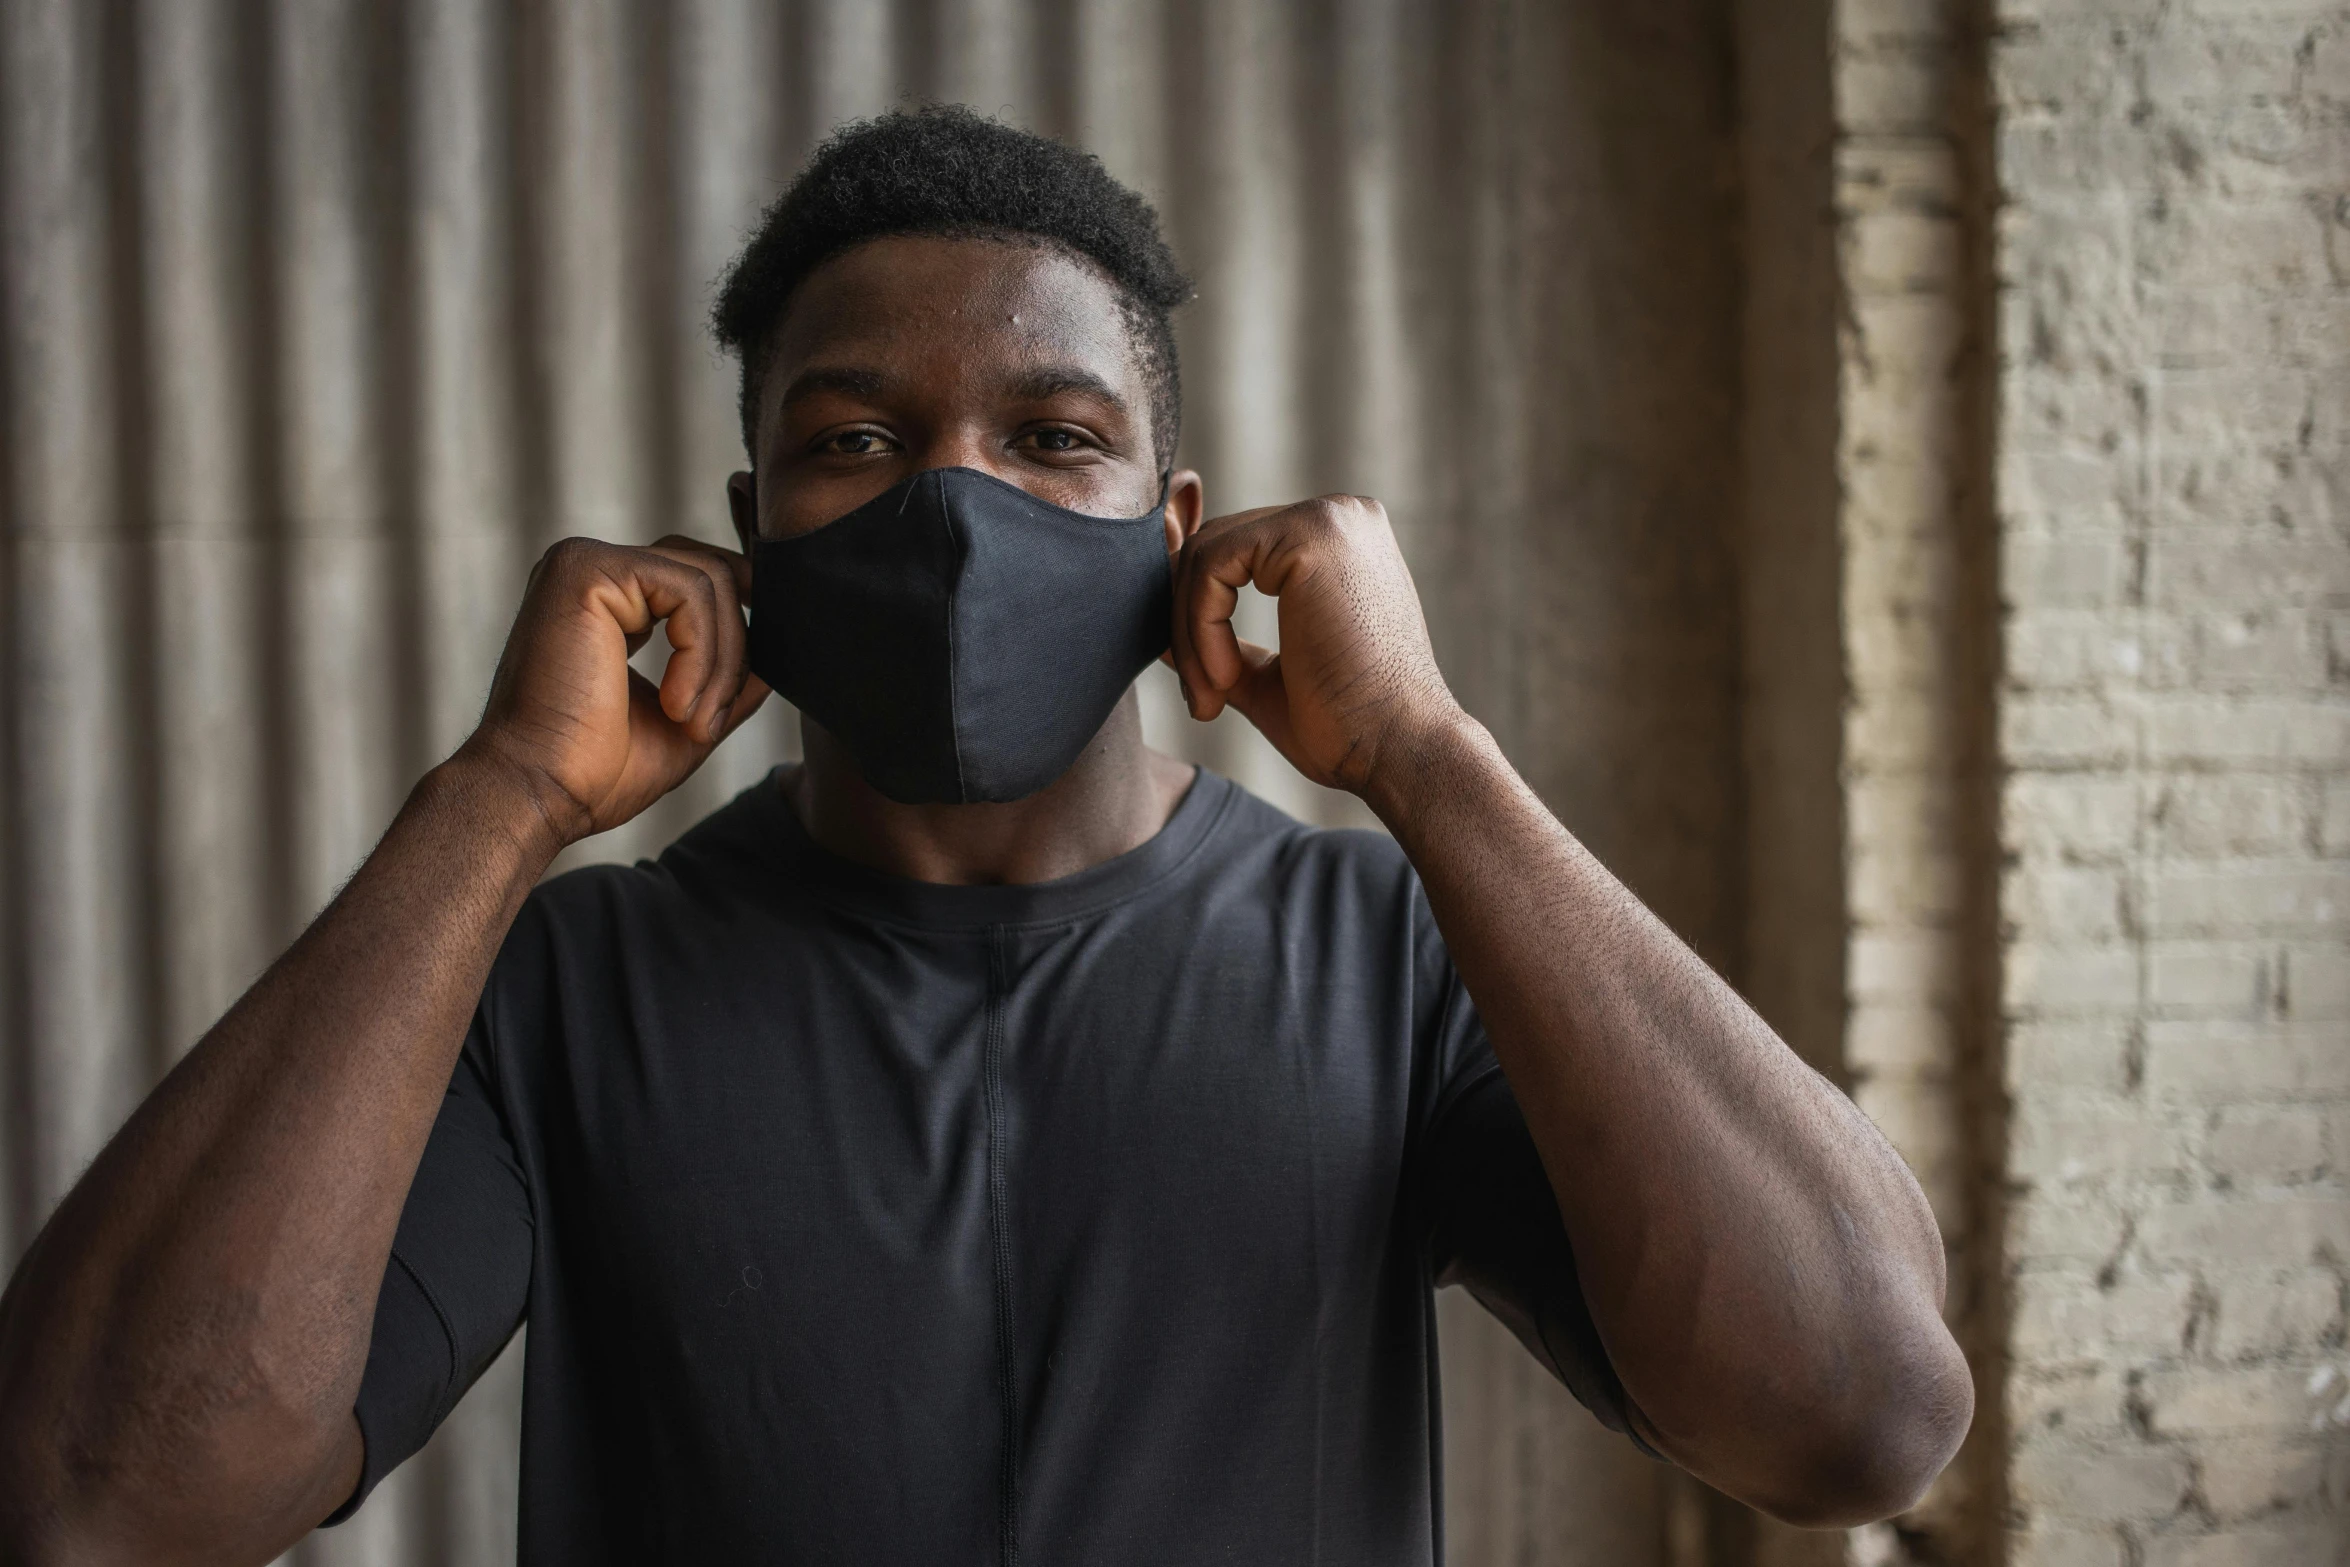 a man putting a mask on his face, he is wearing a black t-shirt, dark skinned, wearing fitness gear, thumbnail